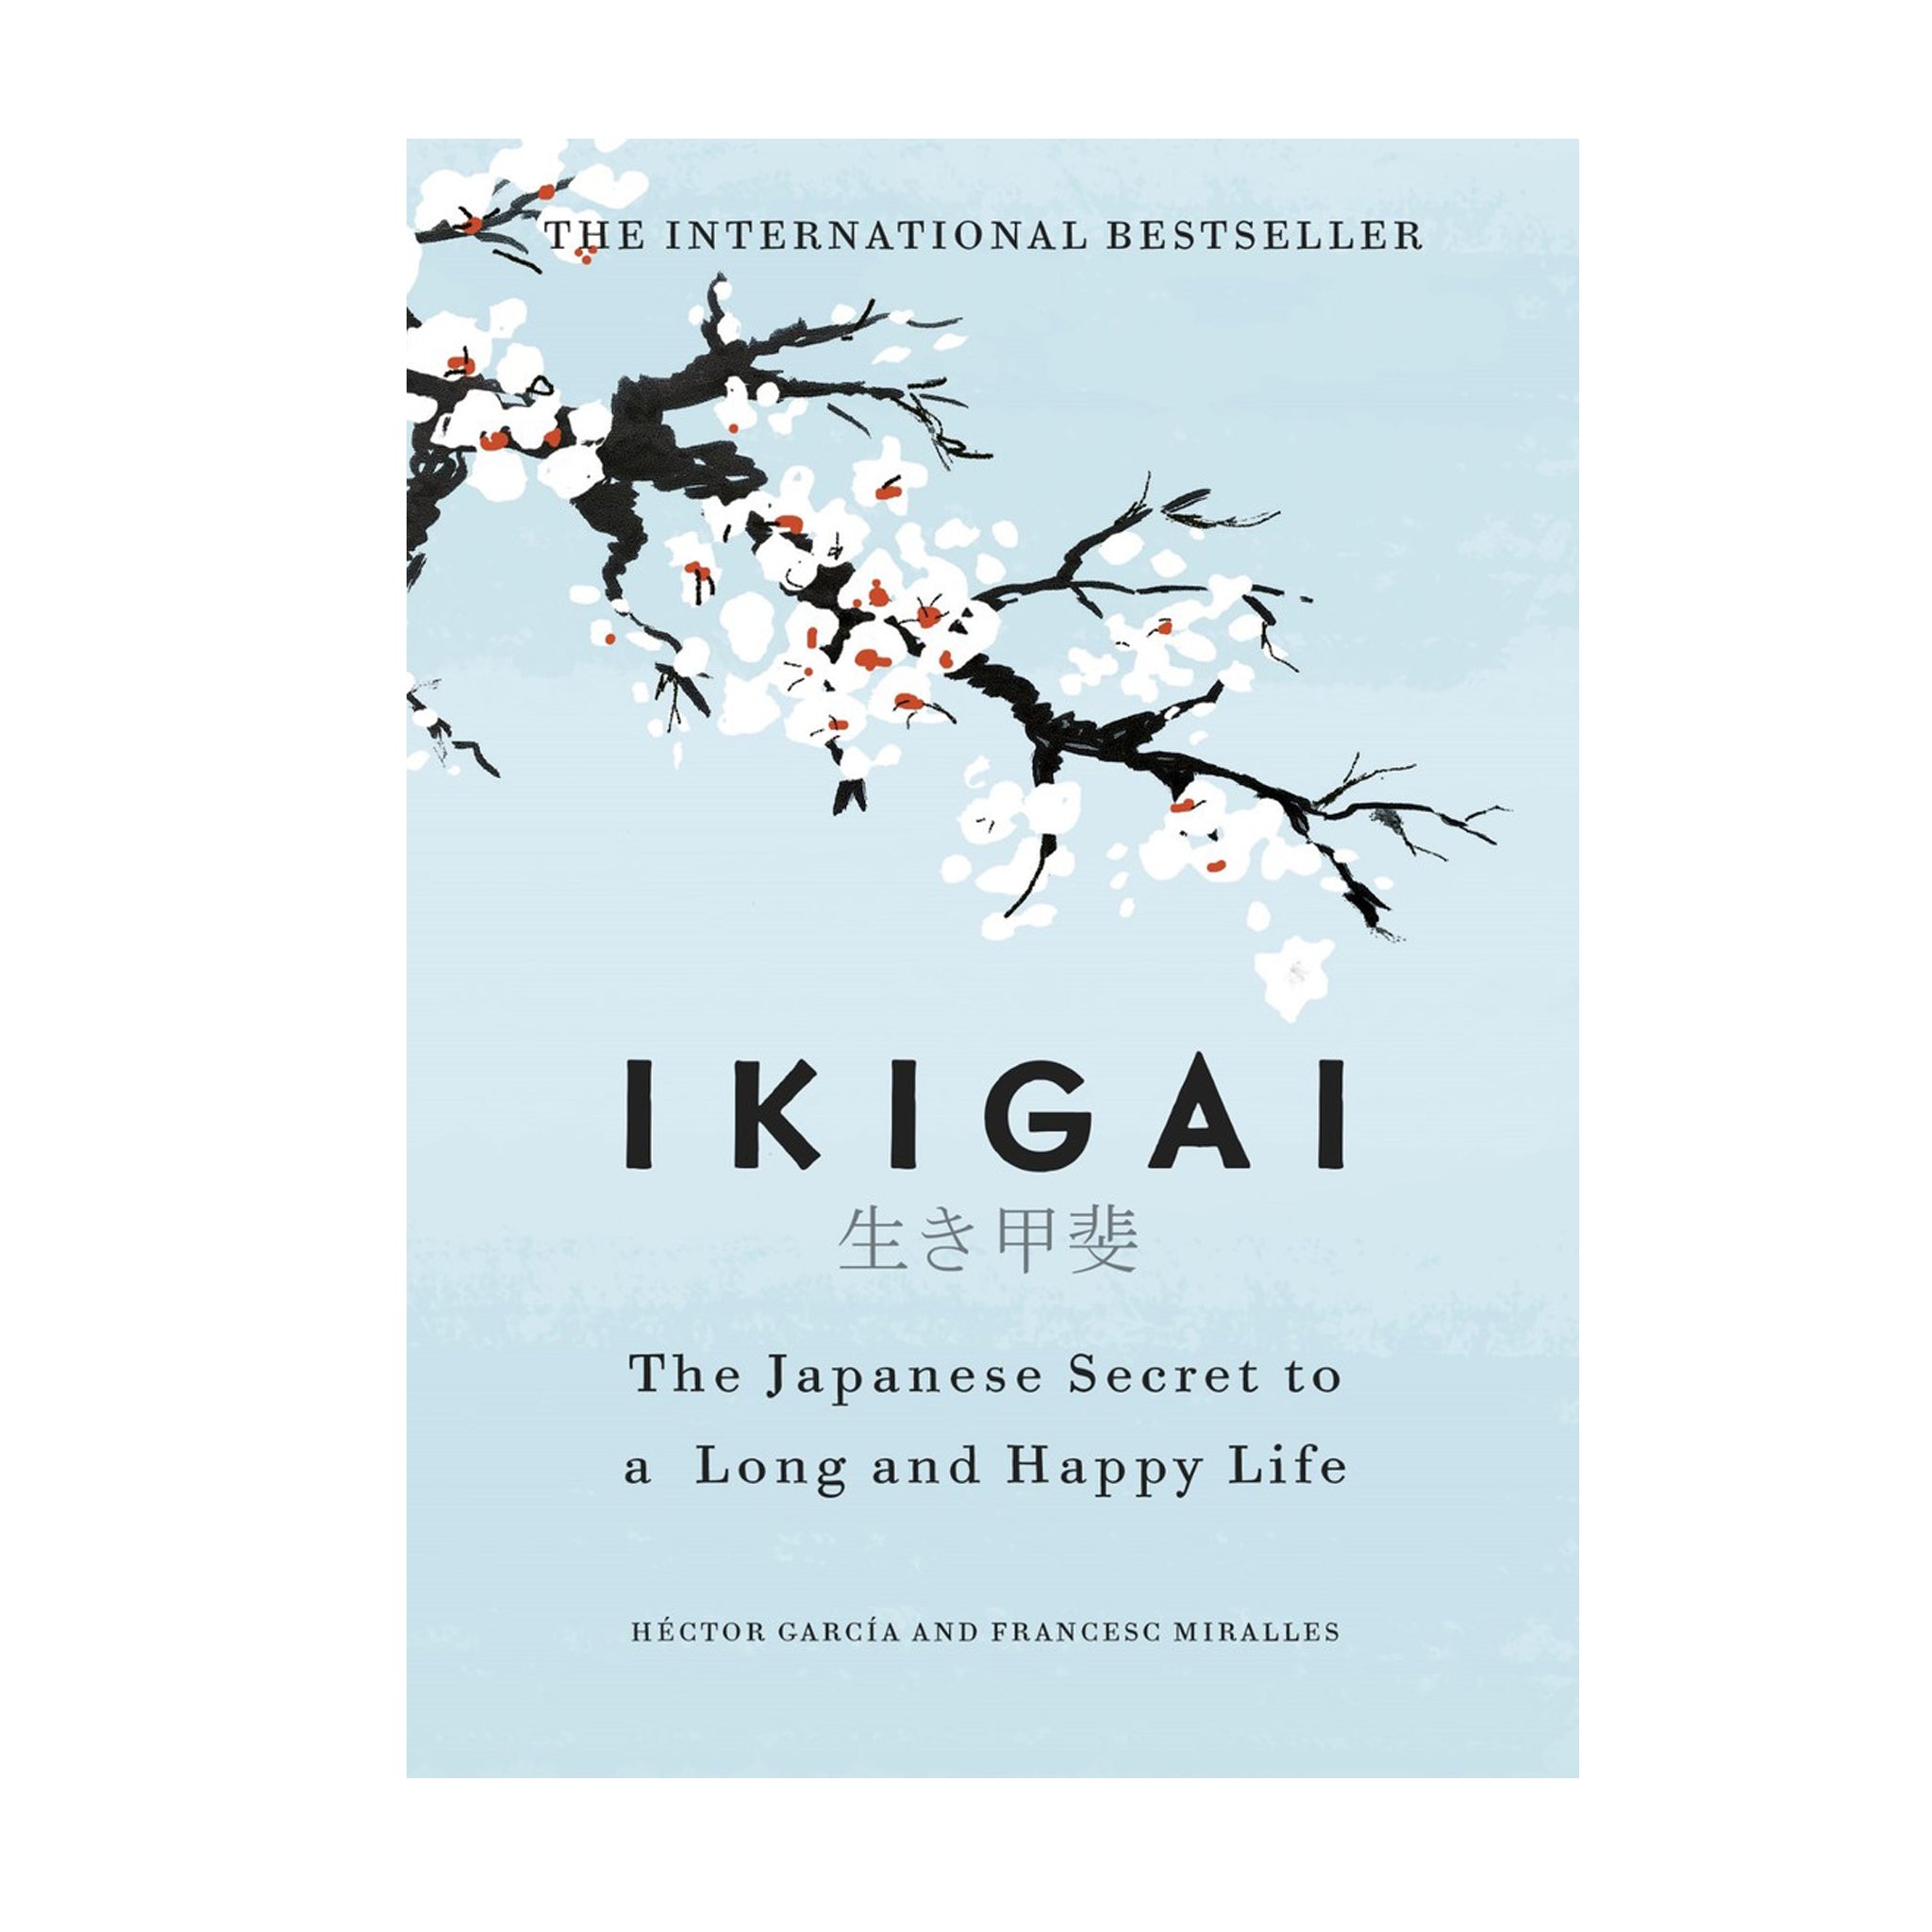 IKIGAI - The Japanese Secret to a Long Happy Life - The Style Salad